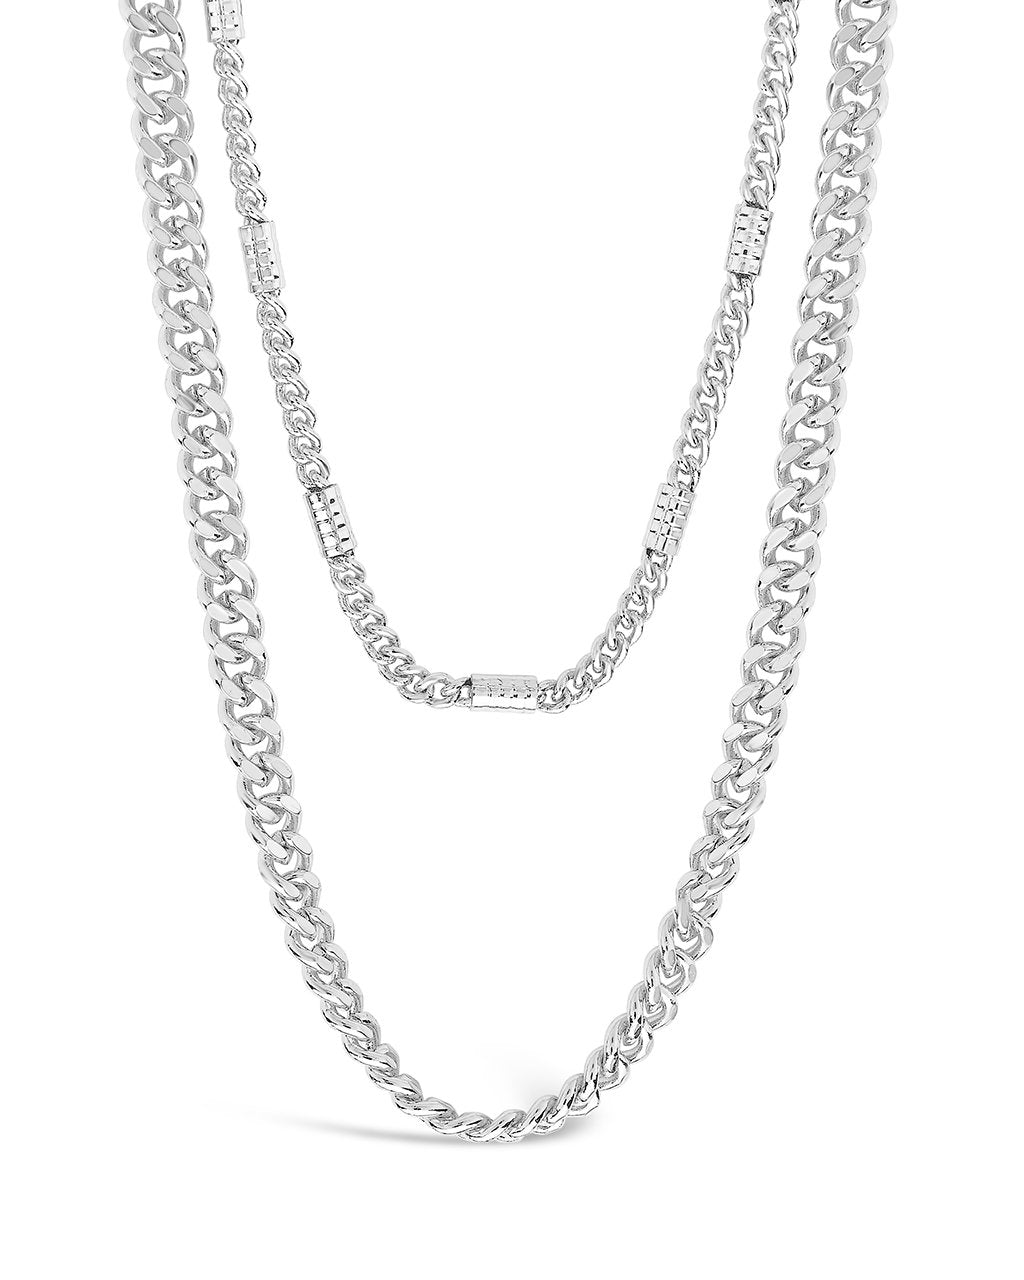 Curb & Station Layered Chain Necklace Necklace Sterling Forever Silver 